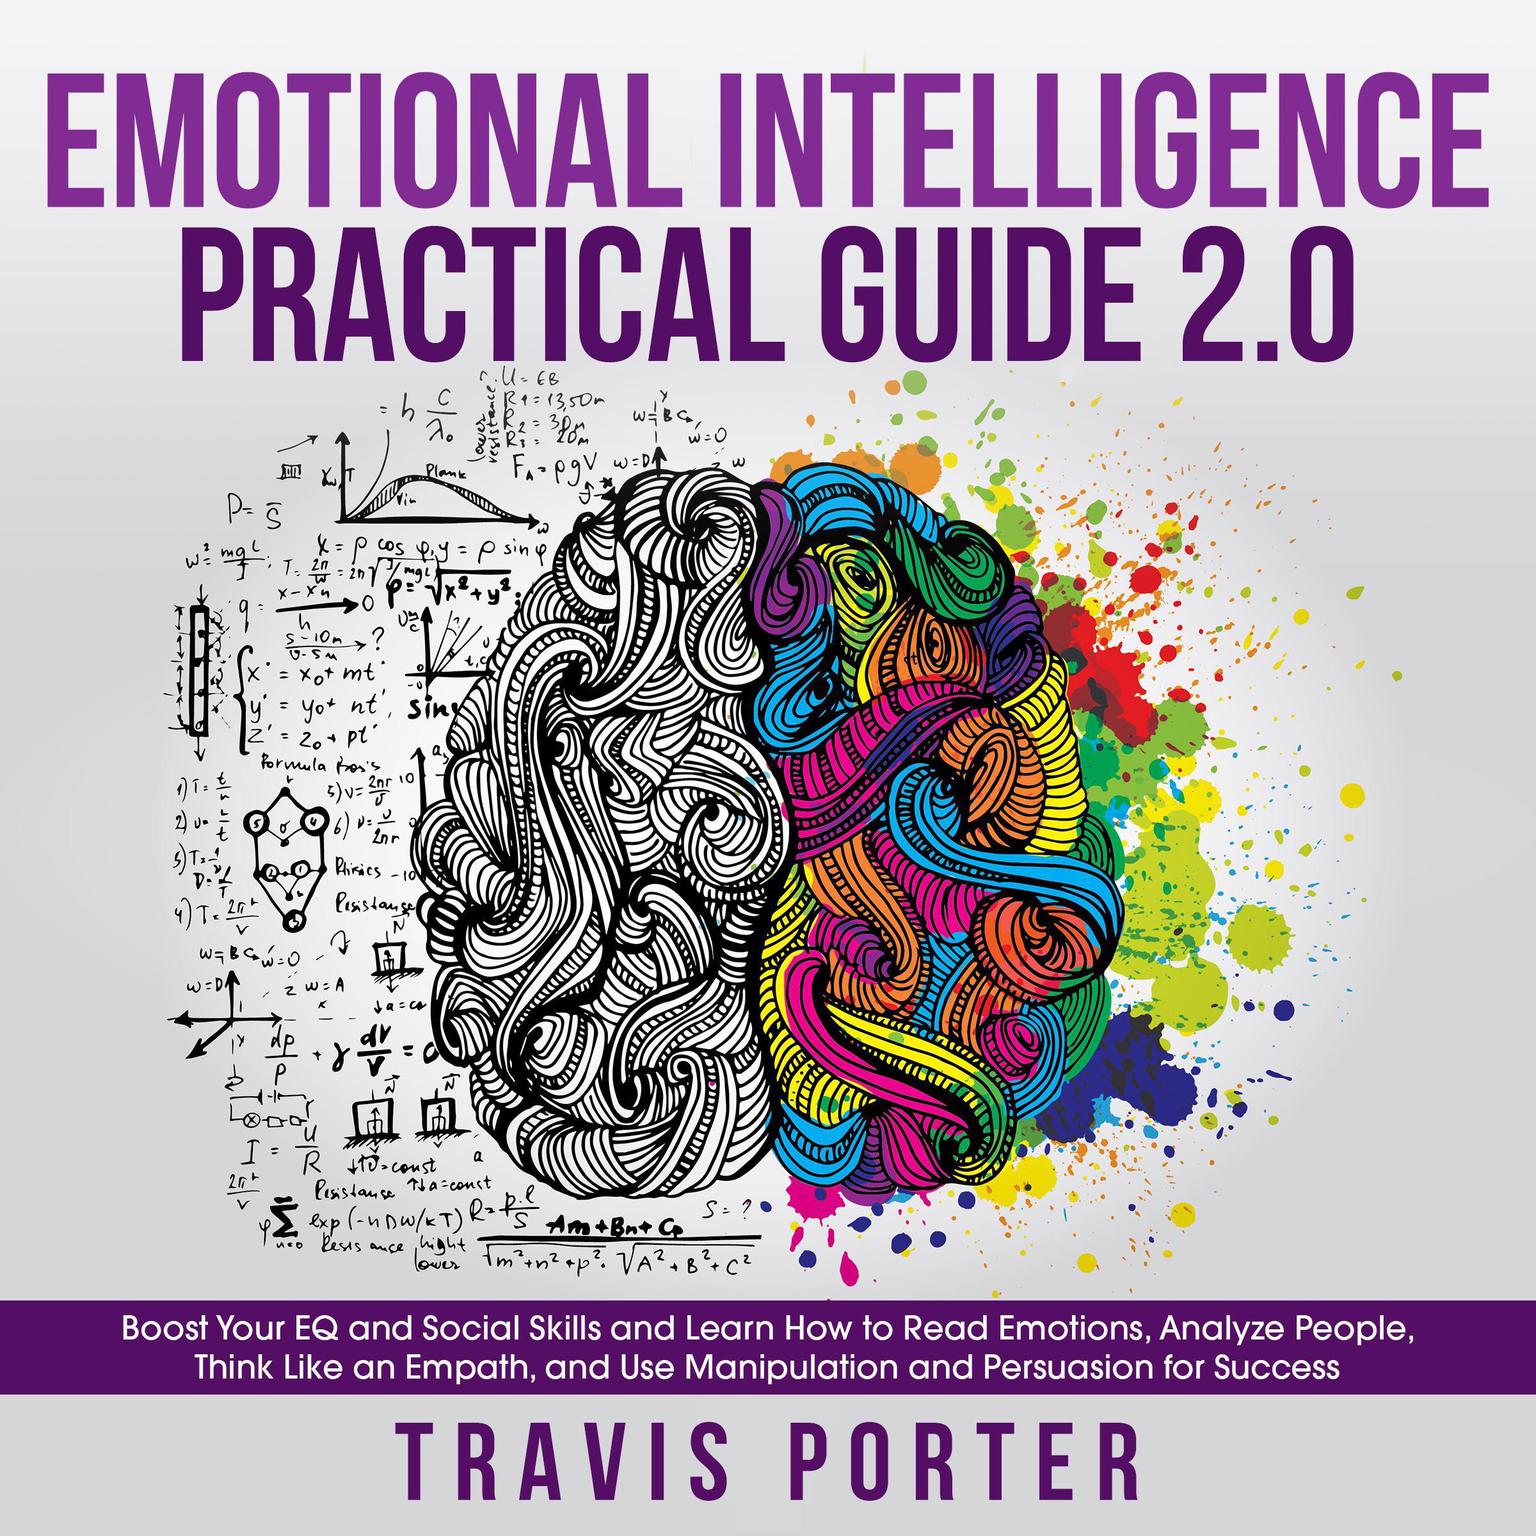 Emotional Intelligence Practical Guide 2.0: Boost Your EQ and Social Skills and Learn How to Read Emotions, Read Emotions, Think Like an Empath, and Use Manipulation and Persuasion for Success Audiobook, by Travis Porter